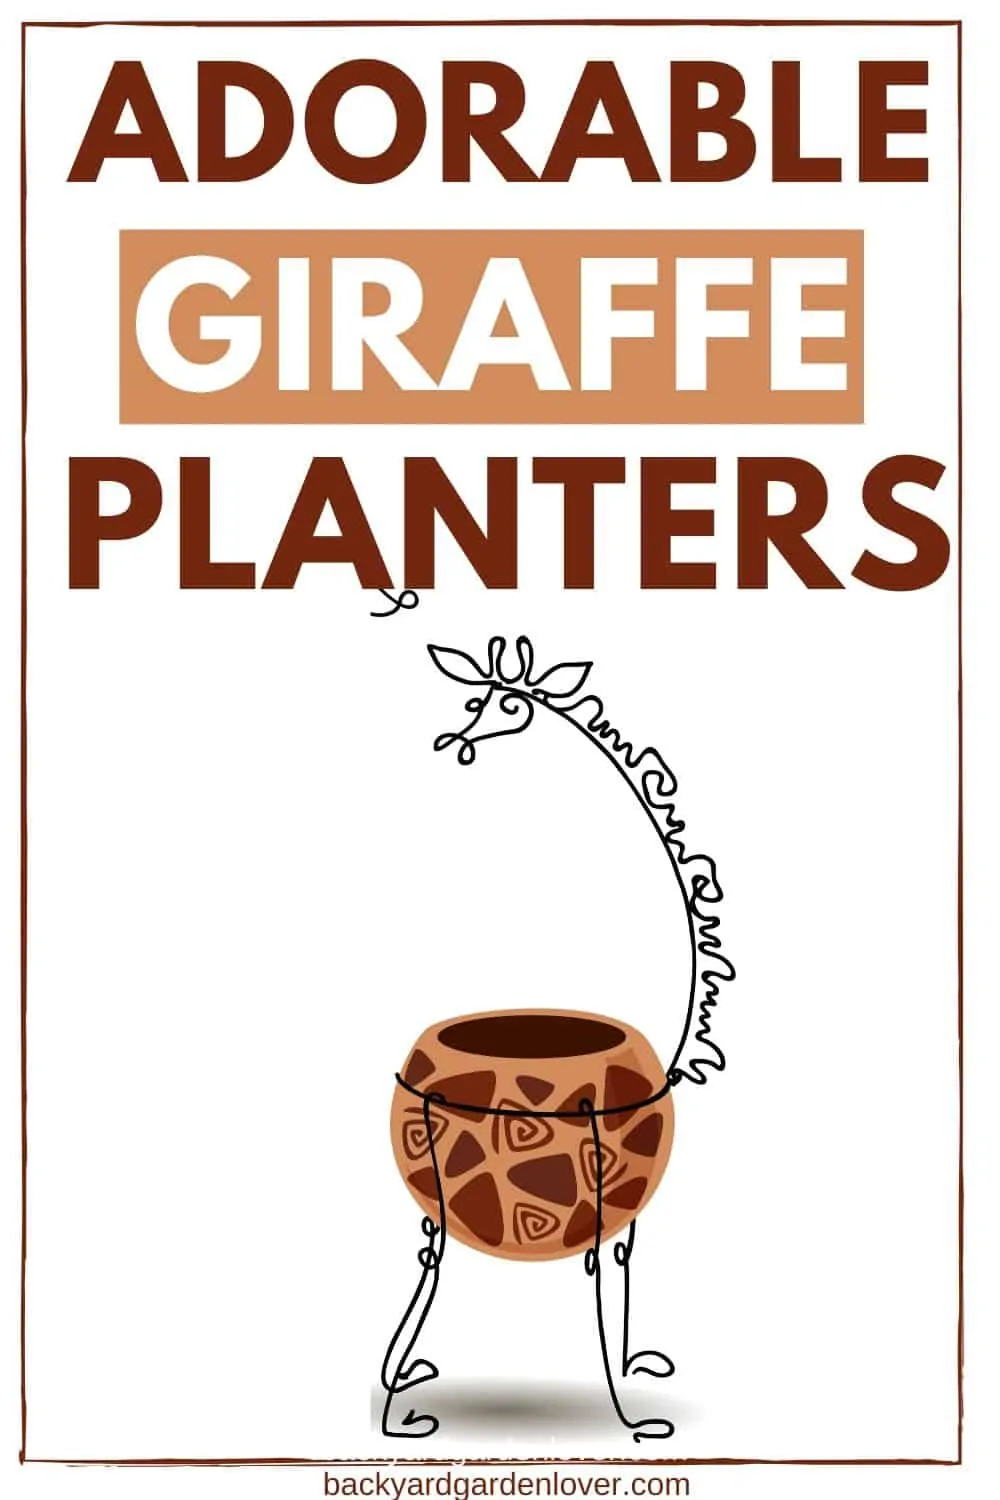 Adorable giraffe planters for your home 